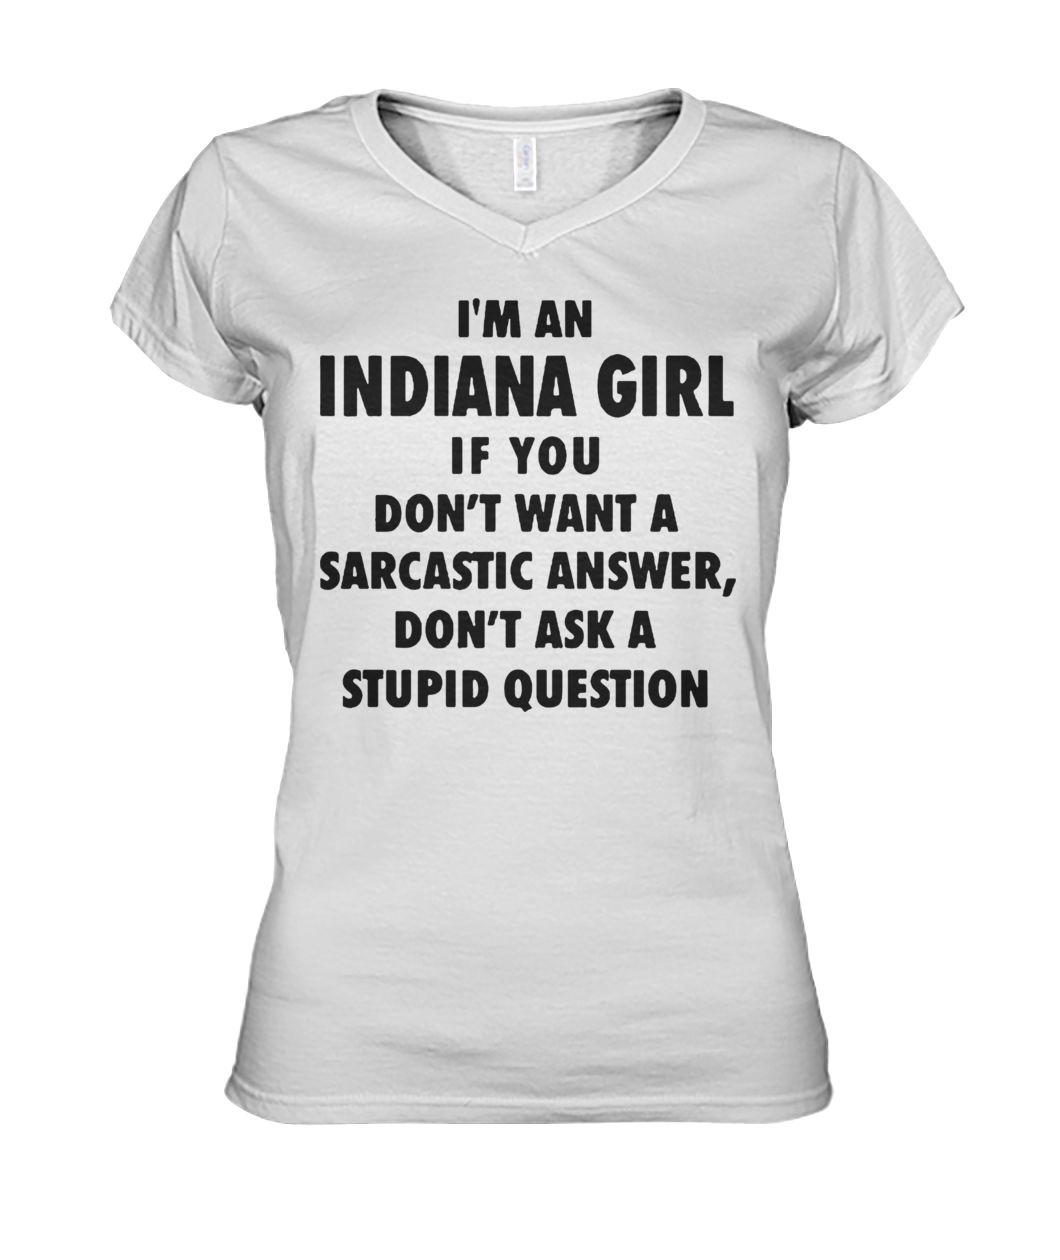 I'm an Indiana girl if you don't want a sarcastic answer don't ask a stupid question women's v-neck